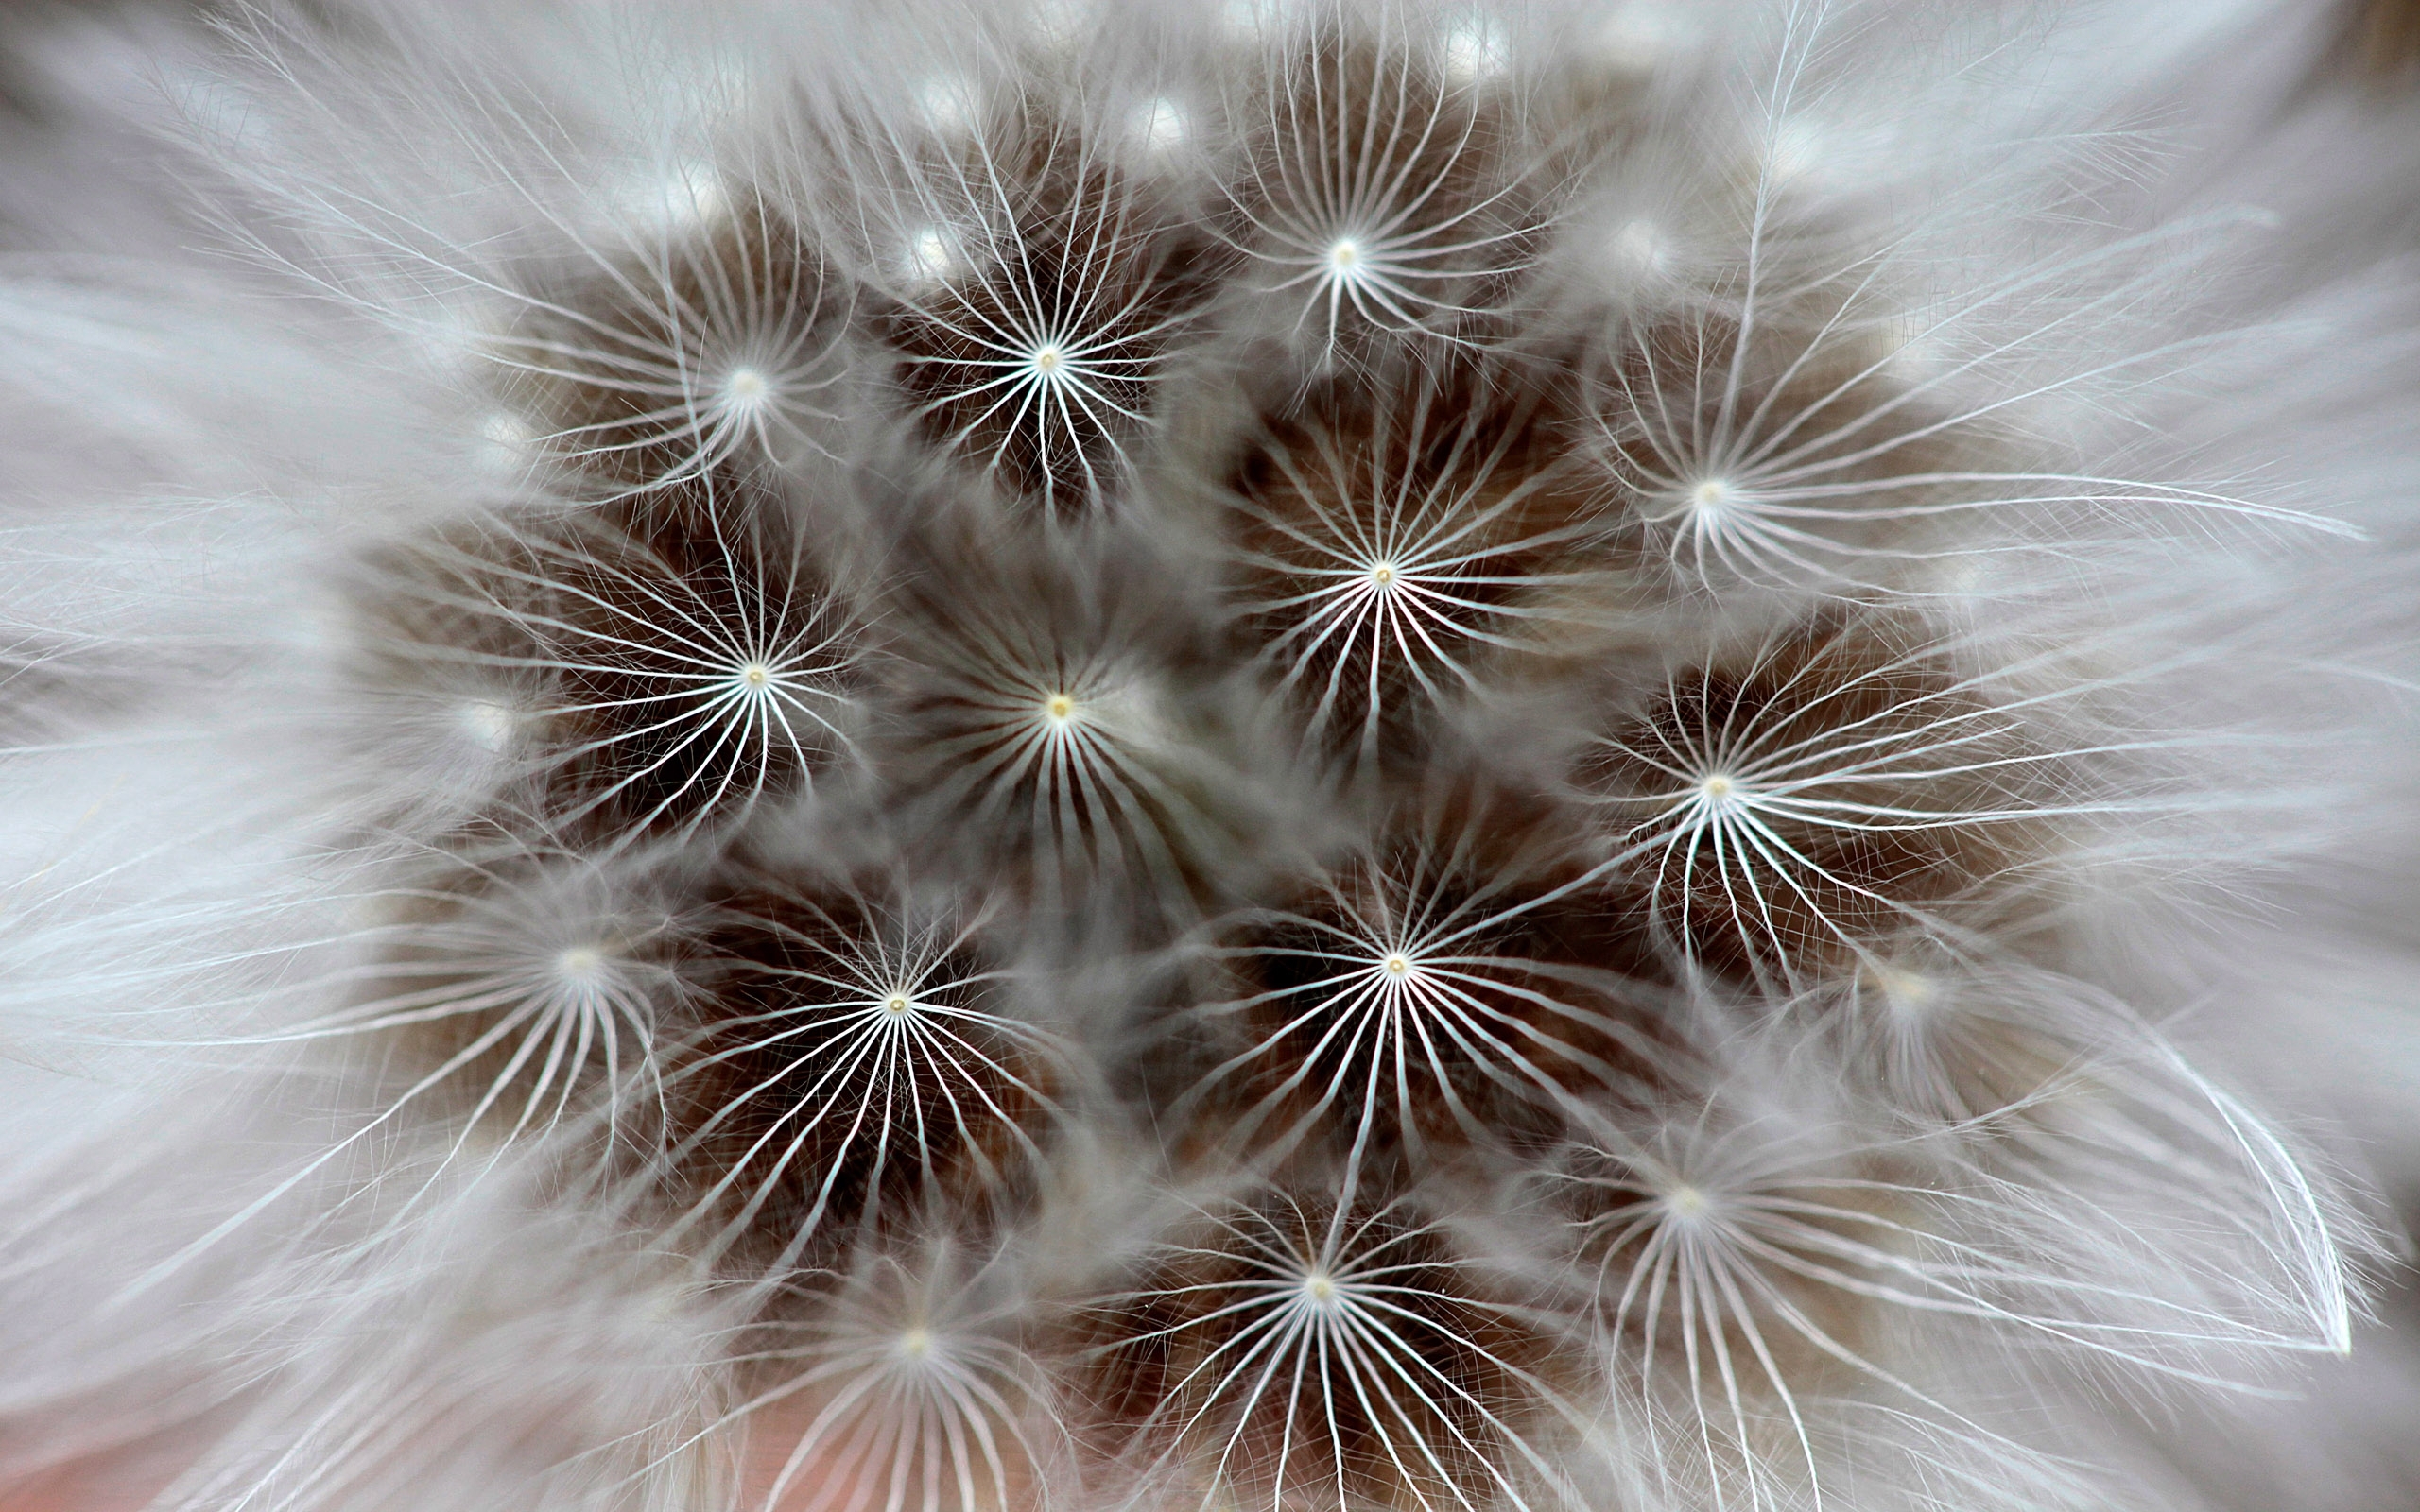 plants, dandelions cell phone wallpapers